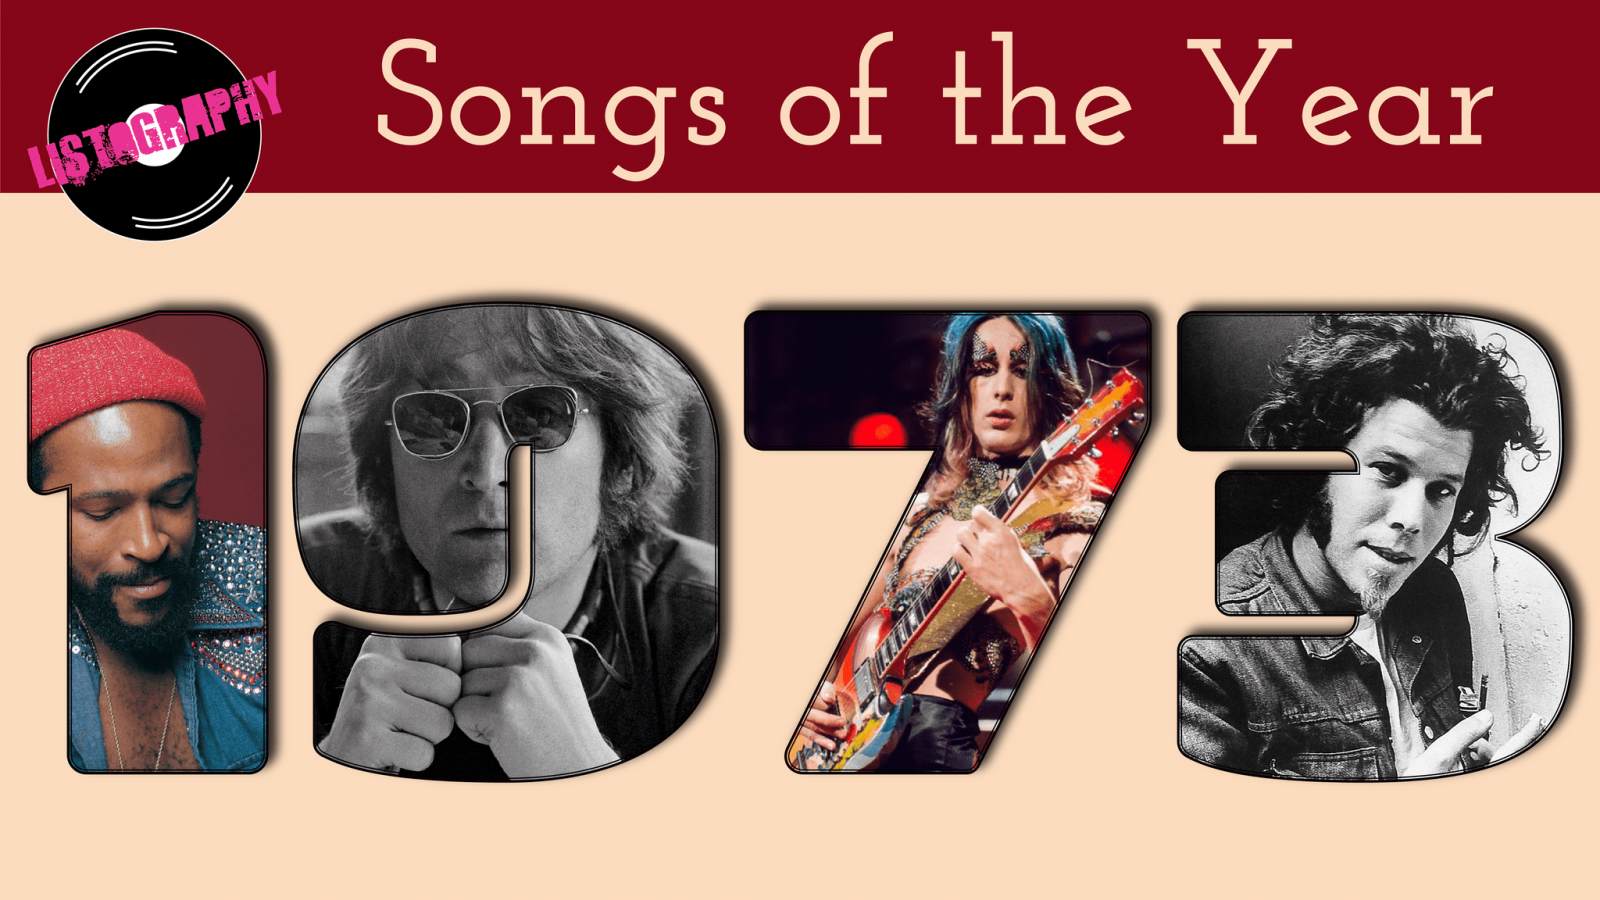 http://www.musicasaurus.com/dynpage_upload/images/Best%20Songs%20from%201973%20graphic.png